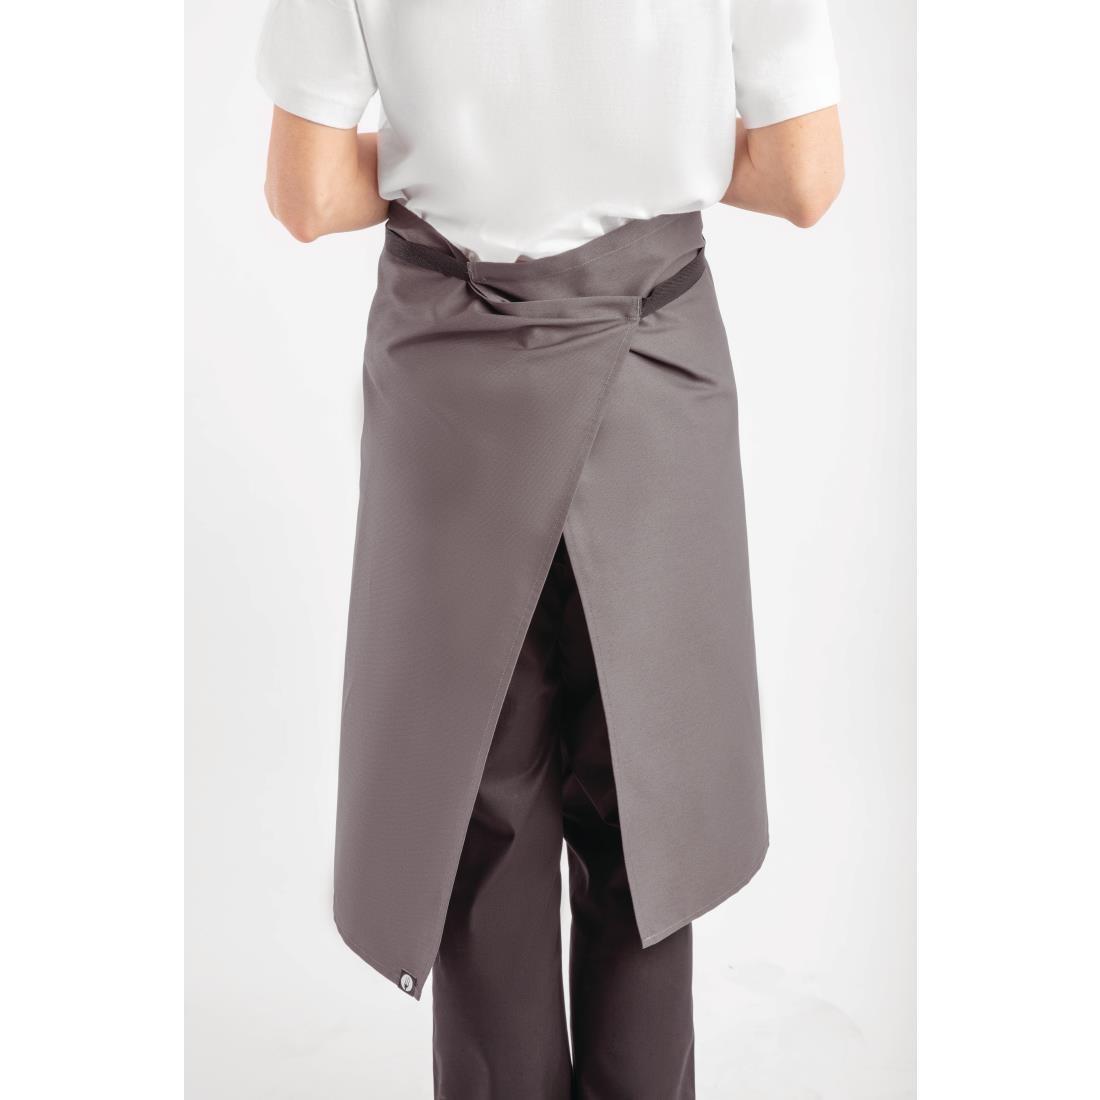 Chef Works Regular Bistro Apron Charcoal - A907  - 4